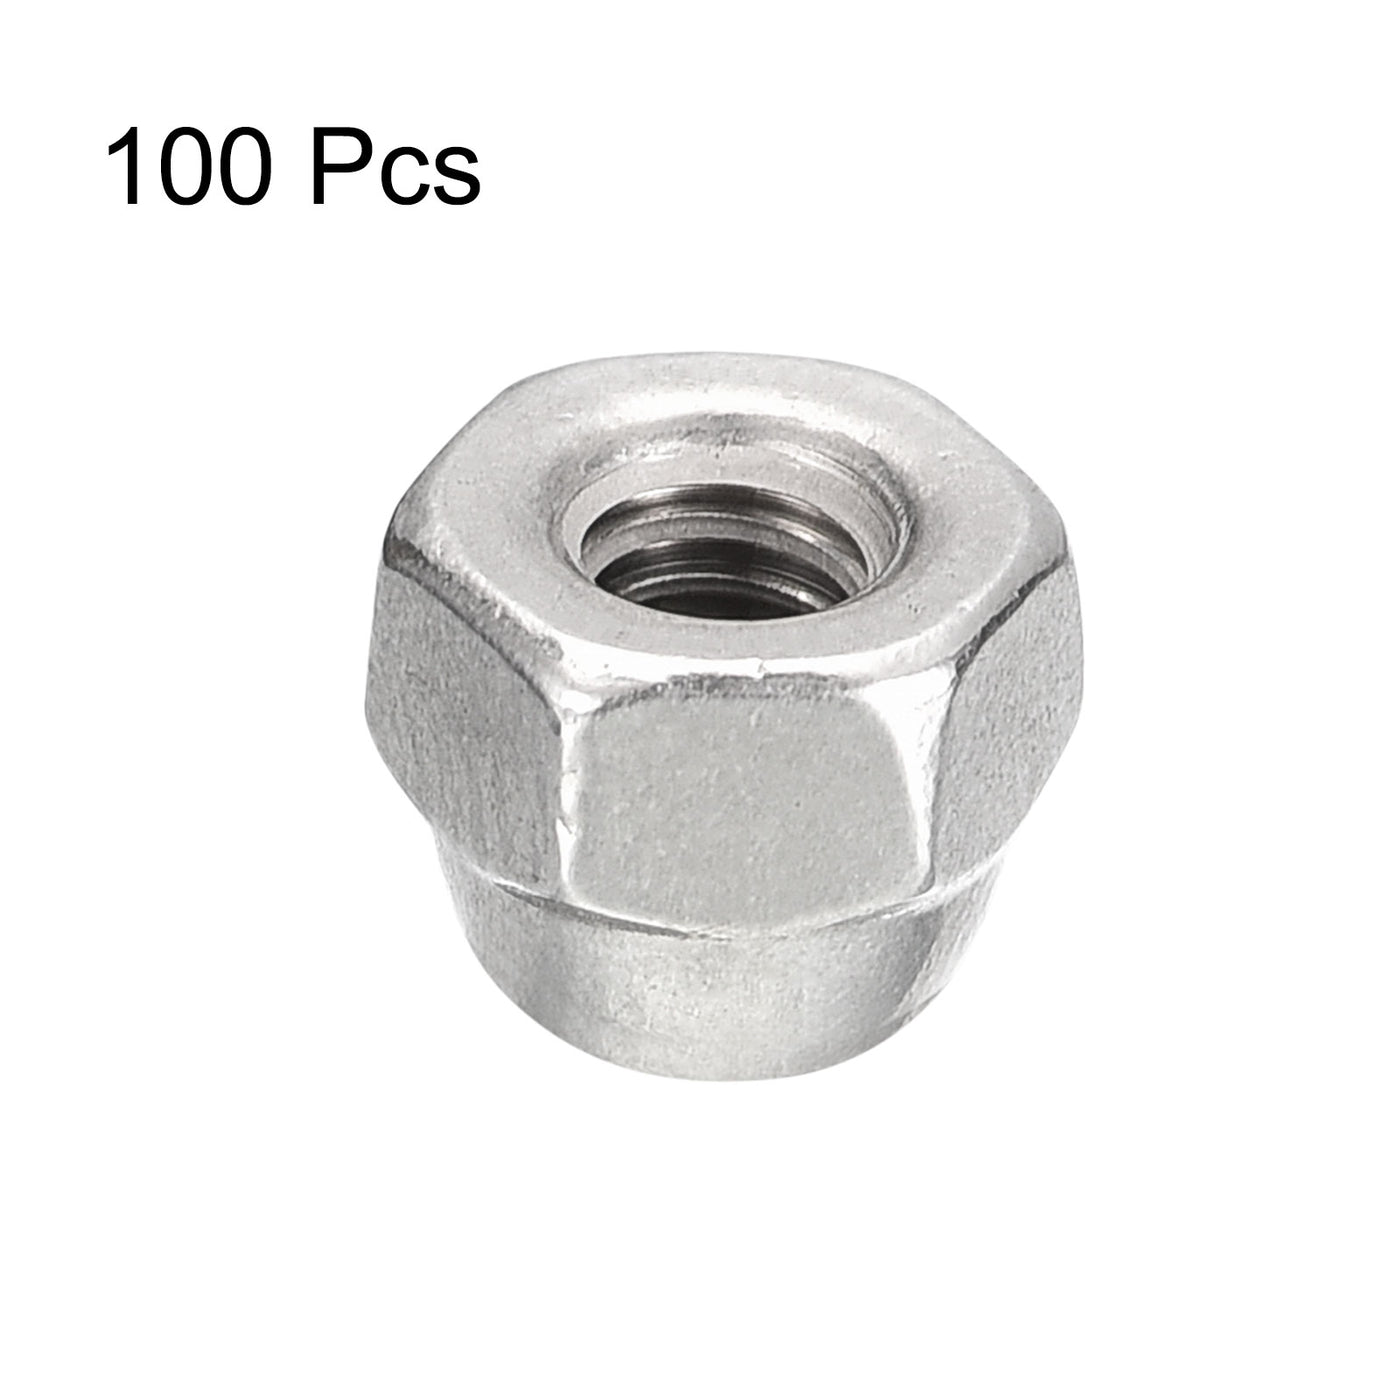 uxcell Uxcell #6-32 Acorn Cap Nuts,100pcs - 304 Stainless Steel Hardware Nuts, Acorn Hex Cap Dome Head Nuts for Fasteners (Silver)